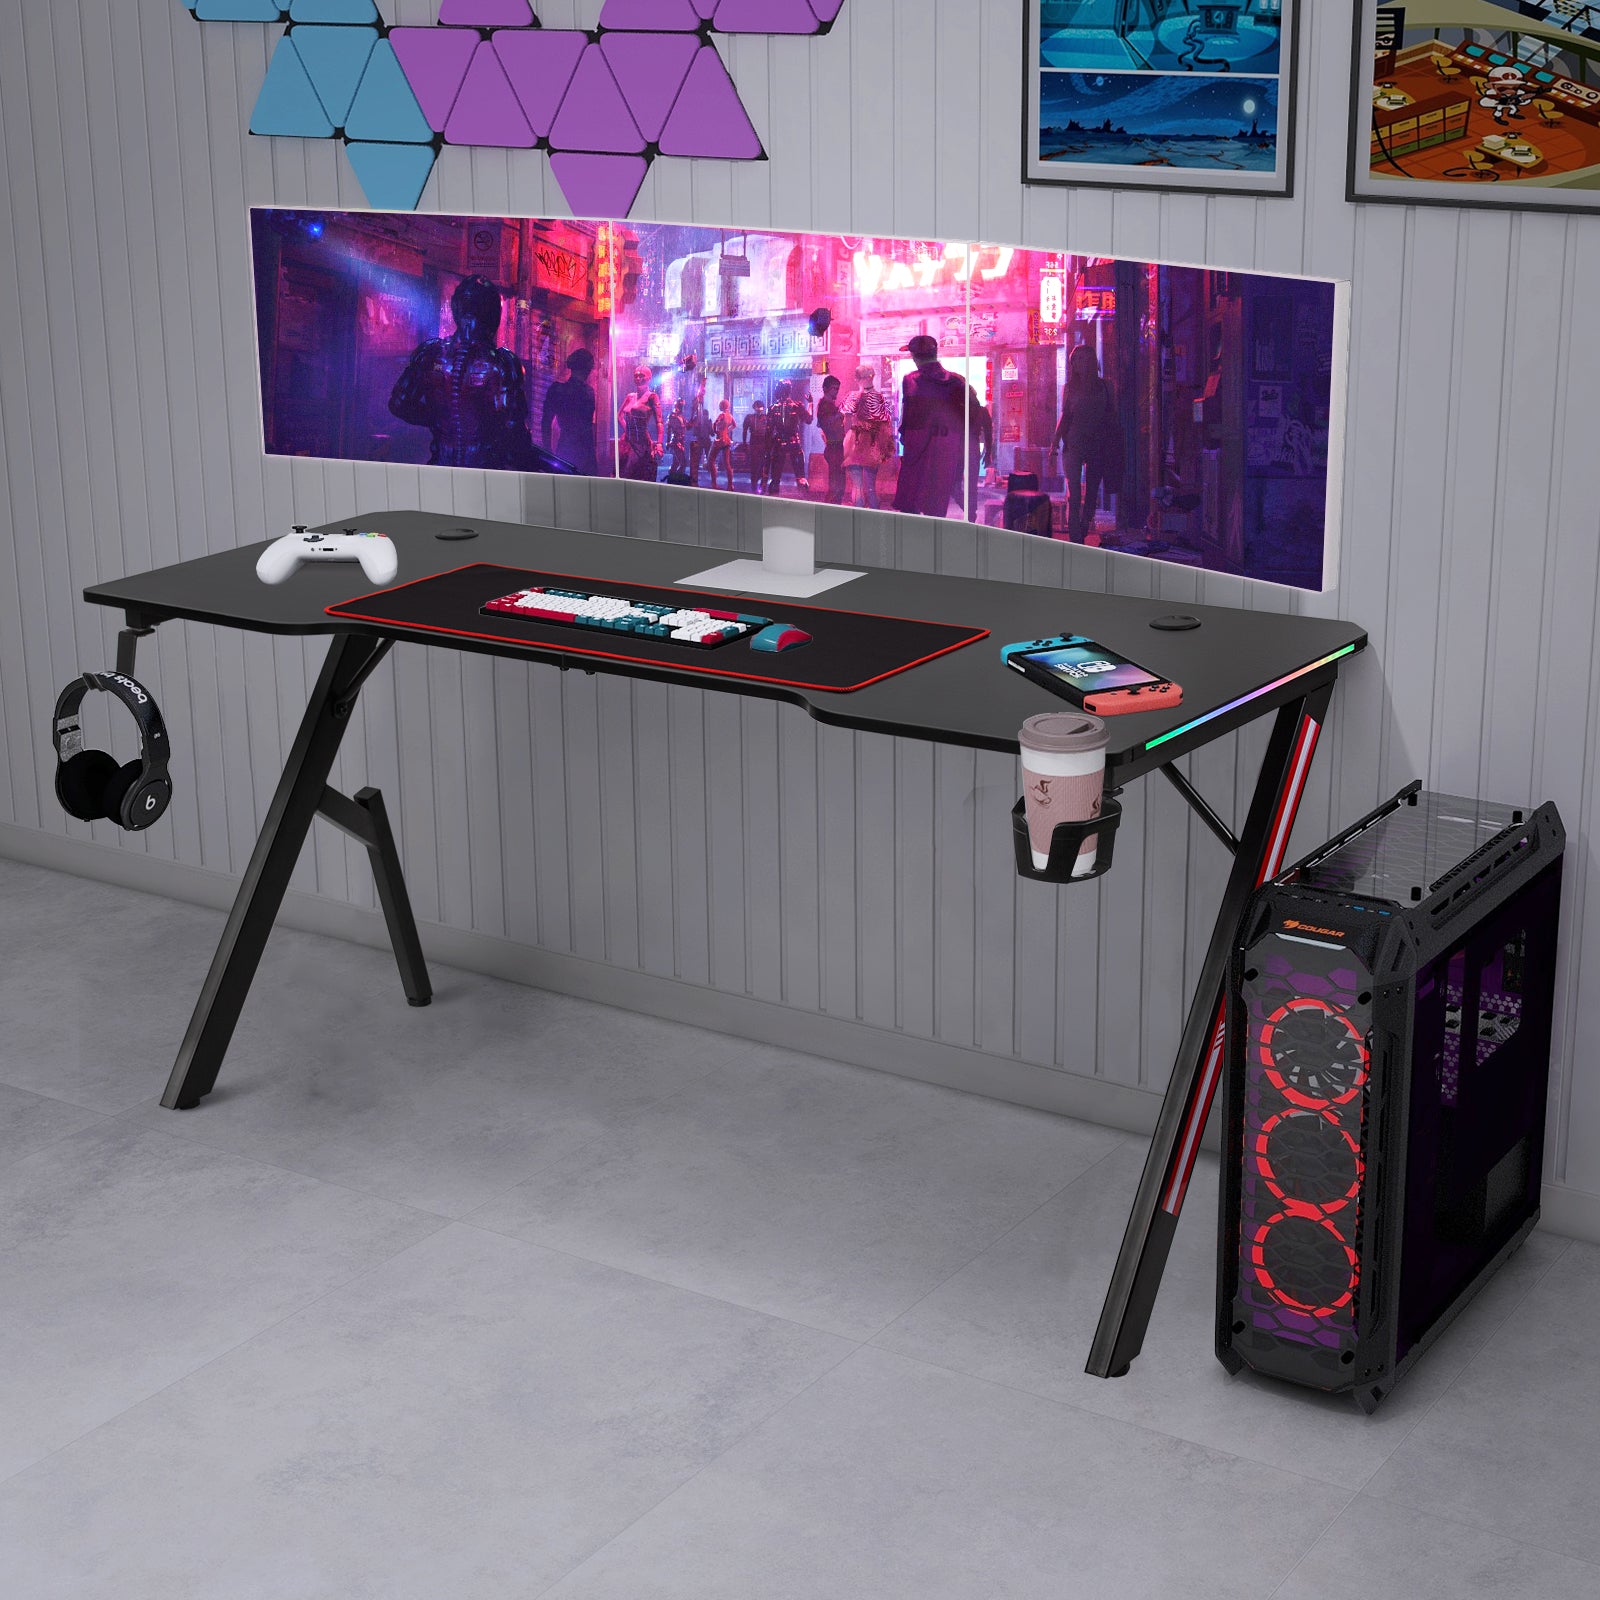 Todeco-LED-Gaming-Desk-160-x-60cm-Large-Gaming-Desk-with-Carbon-Fiber-Top-Ergonomic-Desk-with-Mouse-Pad-Cup-Holder-and-Headphone-Hook